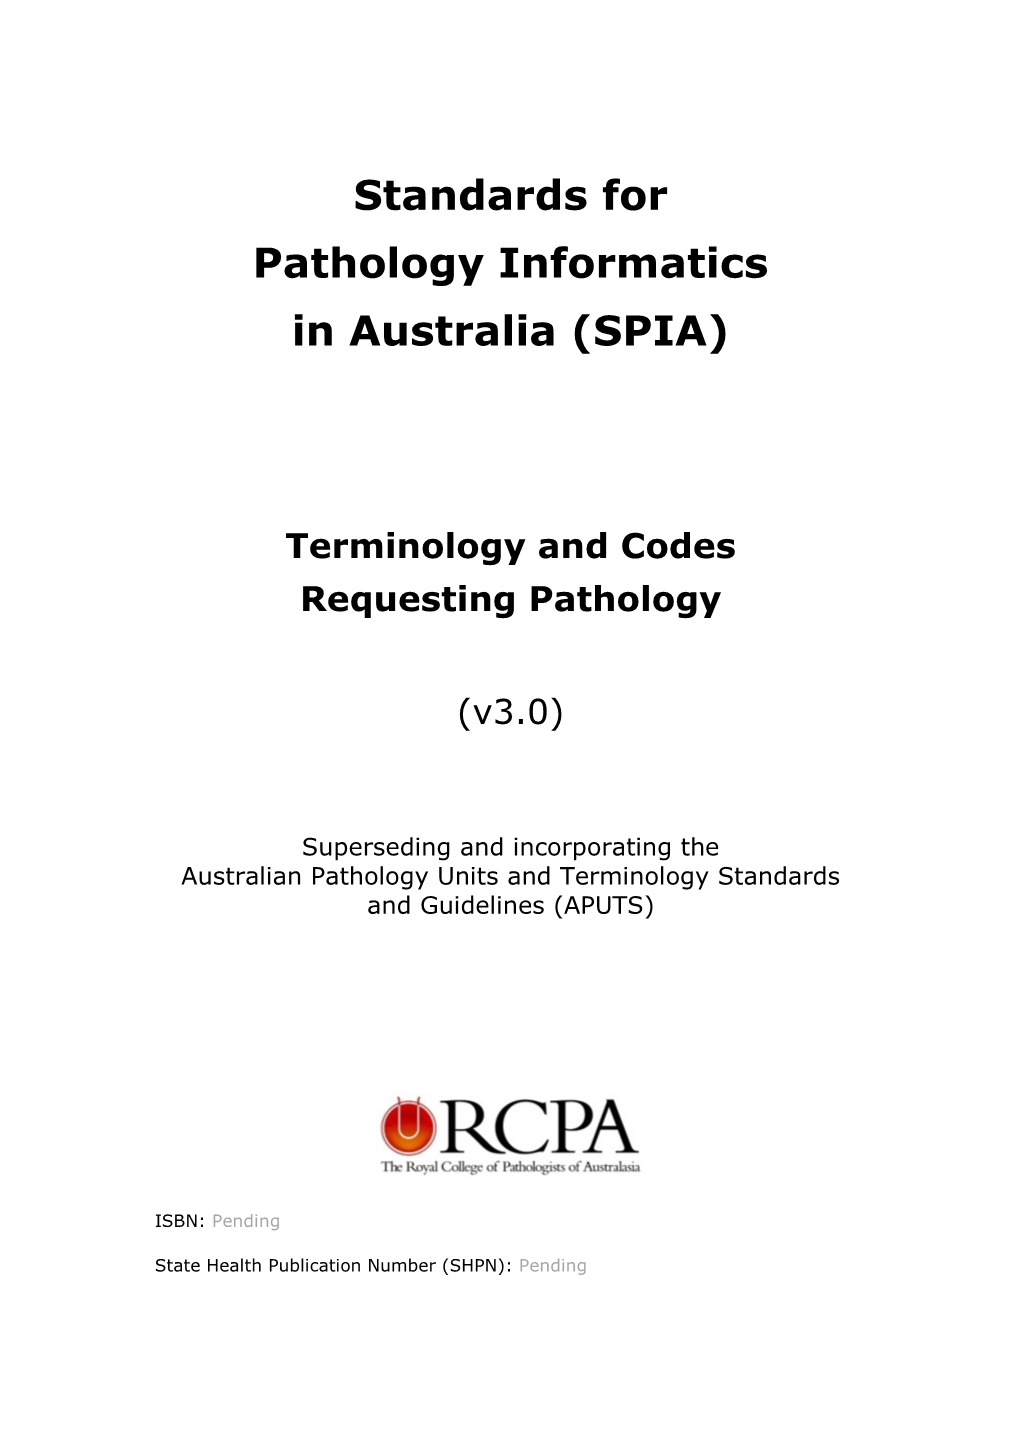 (SPIA) Terminology and Codes Requesting Pathology